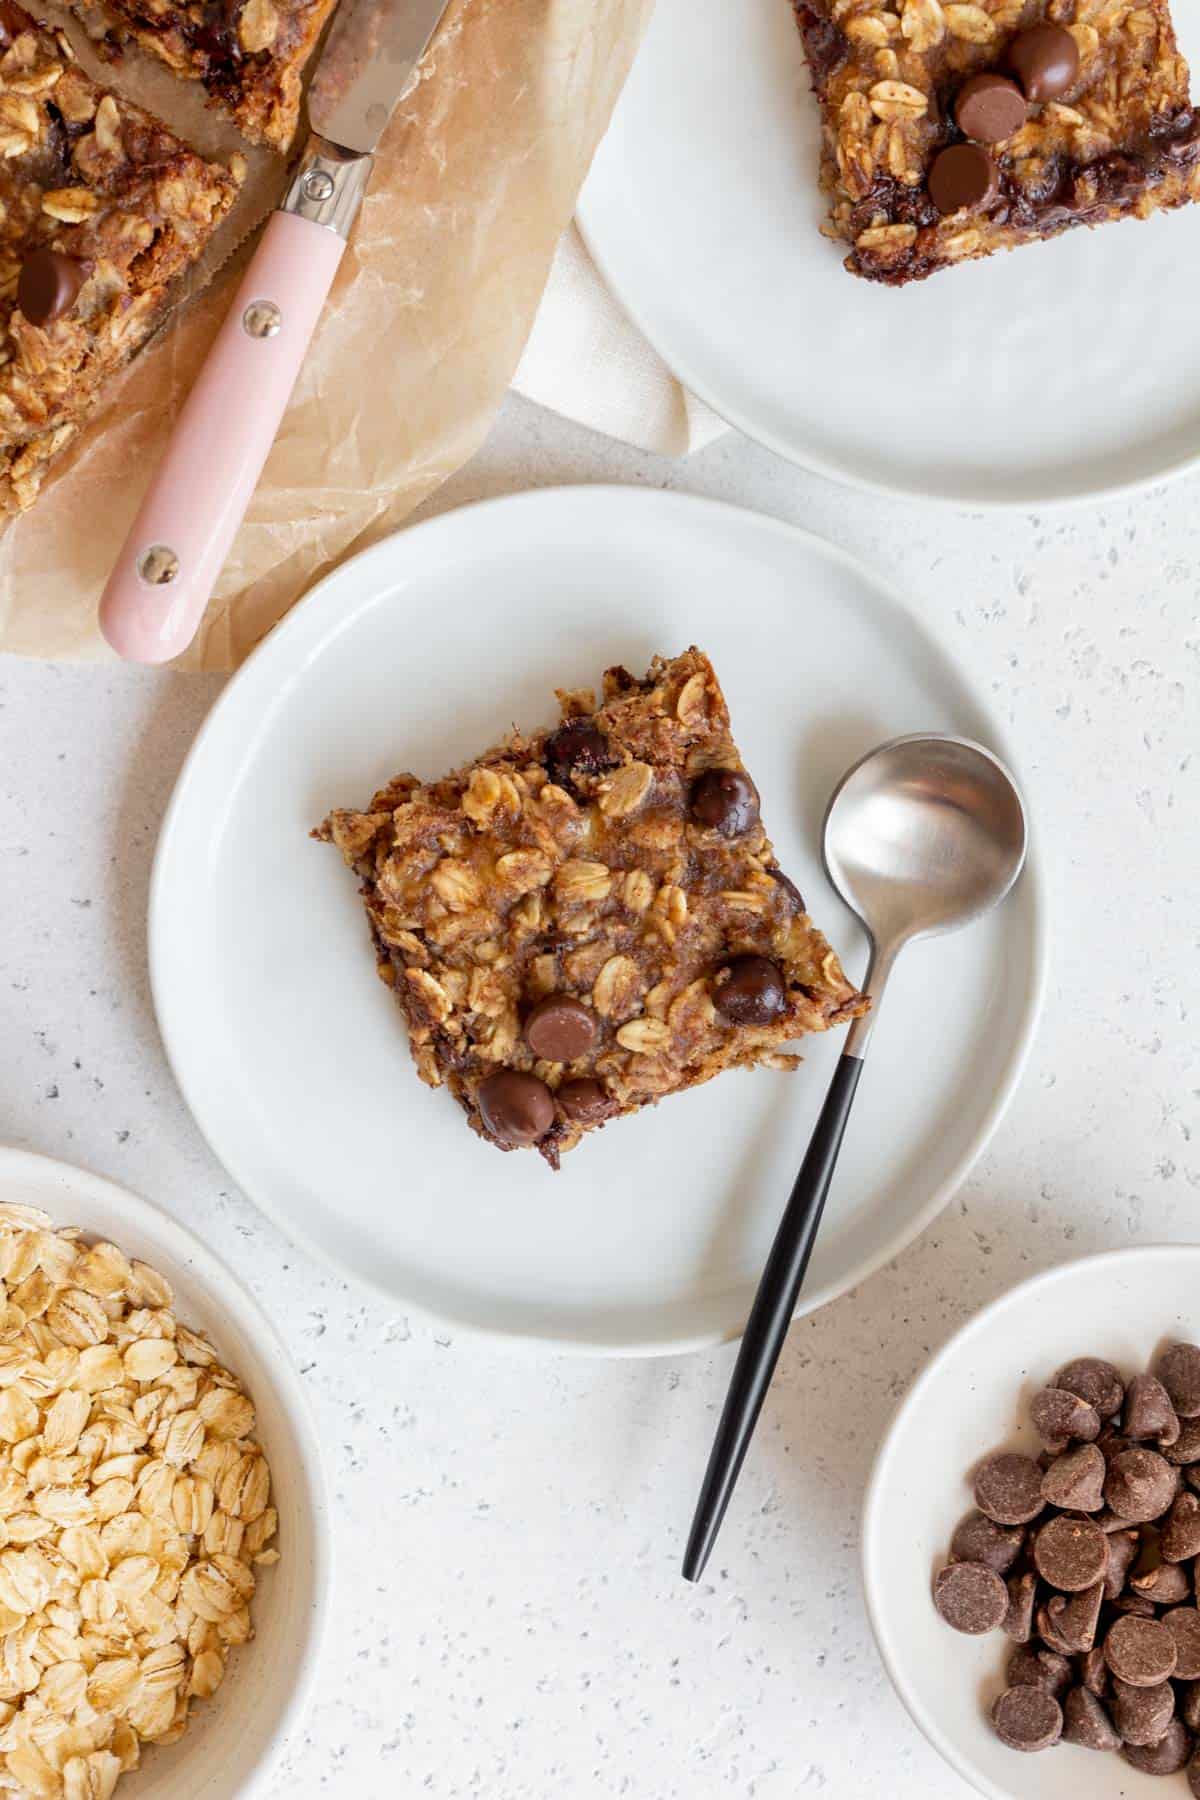 Overhead view of a banana oatmeal bar on a plate with a spoon.